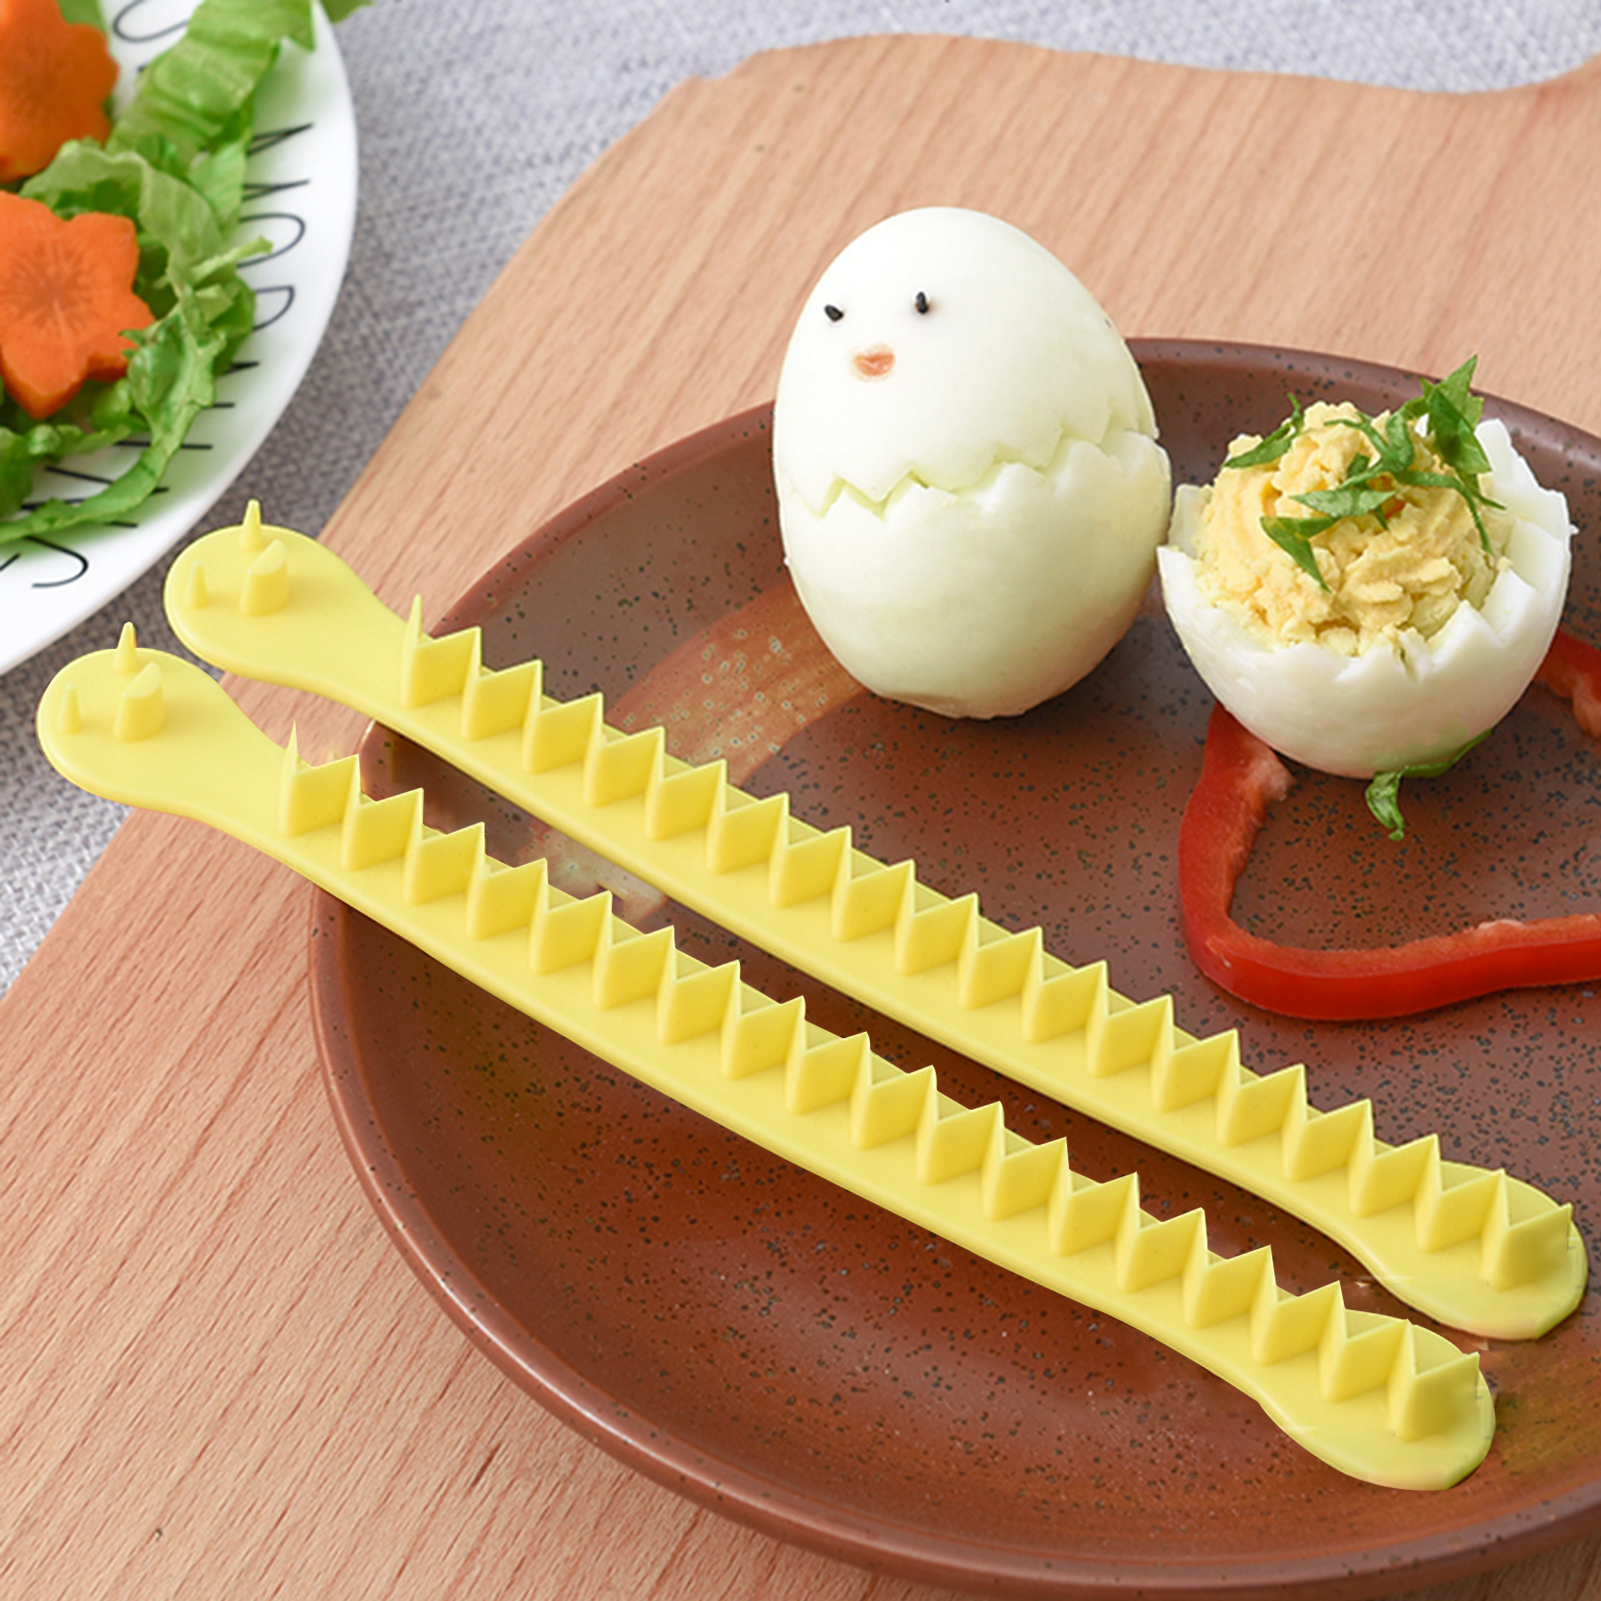 Sanwood Egg Slicer 2pcs Lace Boiled Egg Cutter Smile Face Cutting Slicer DIY Mold Kitchen Accessory, Size: One size, Yellow